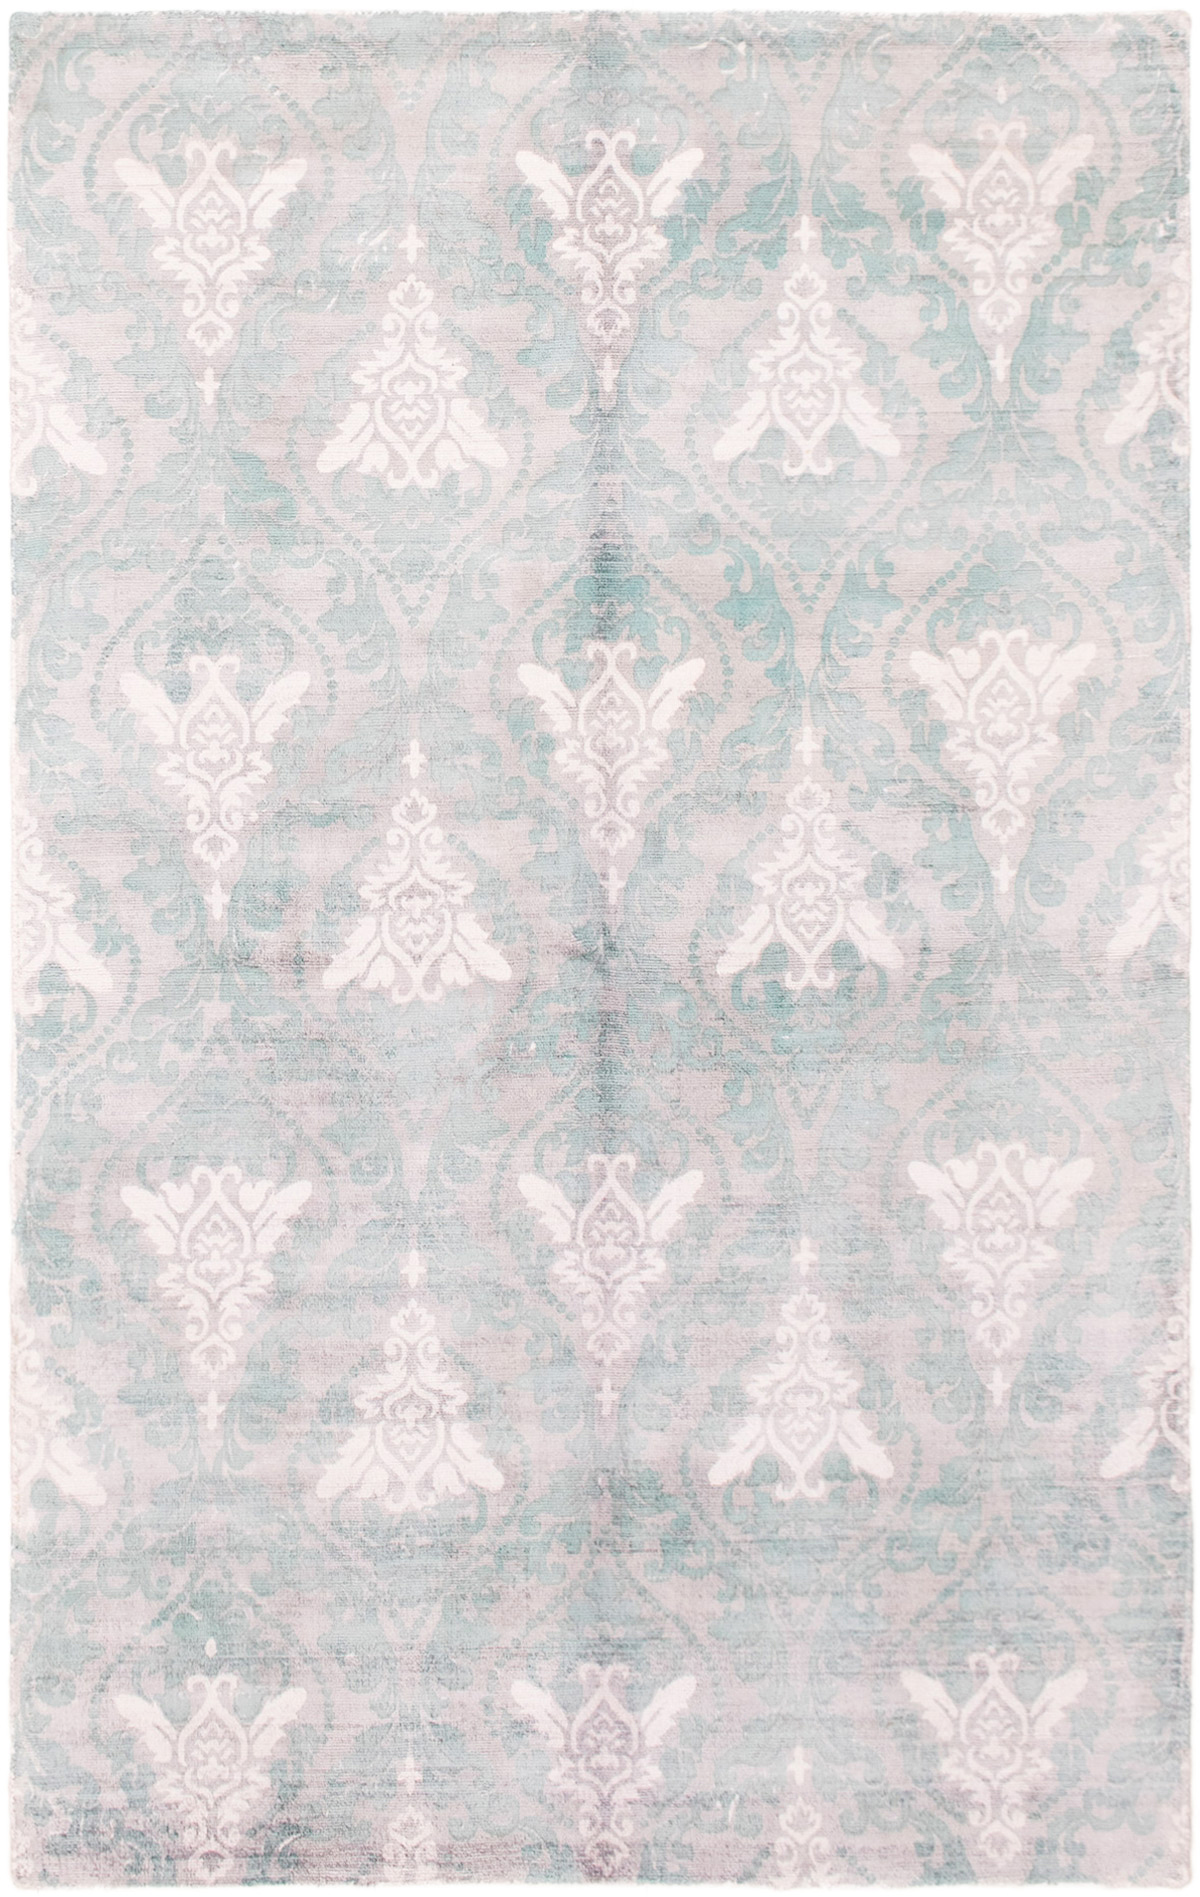 Hand-knotted Galleria Light Grey Viscose Rug 4'11" x 7'10" Size: 4'11" x 7'10"  